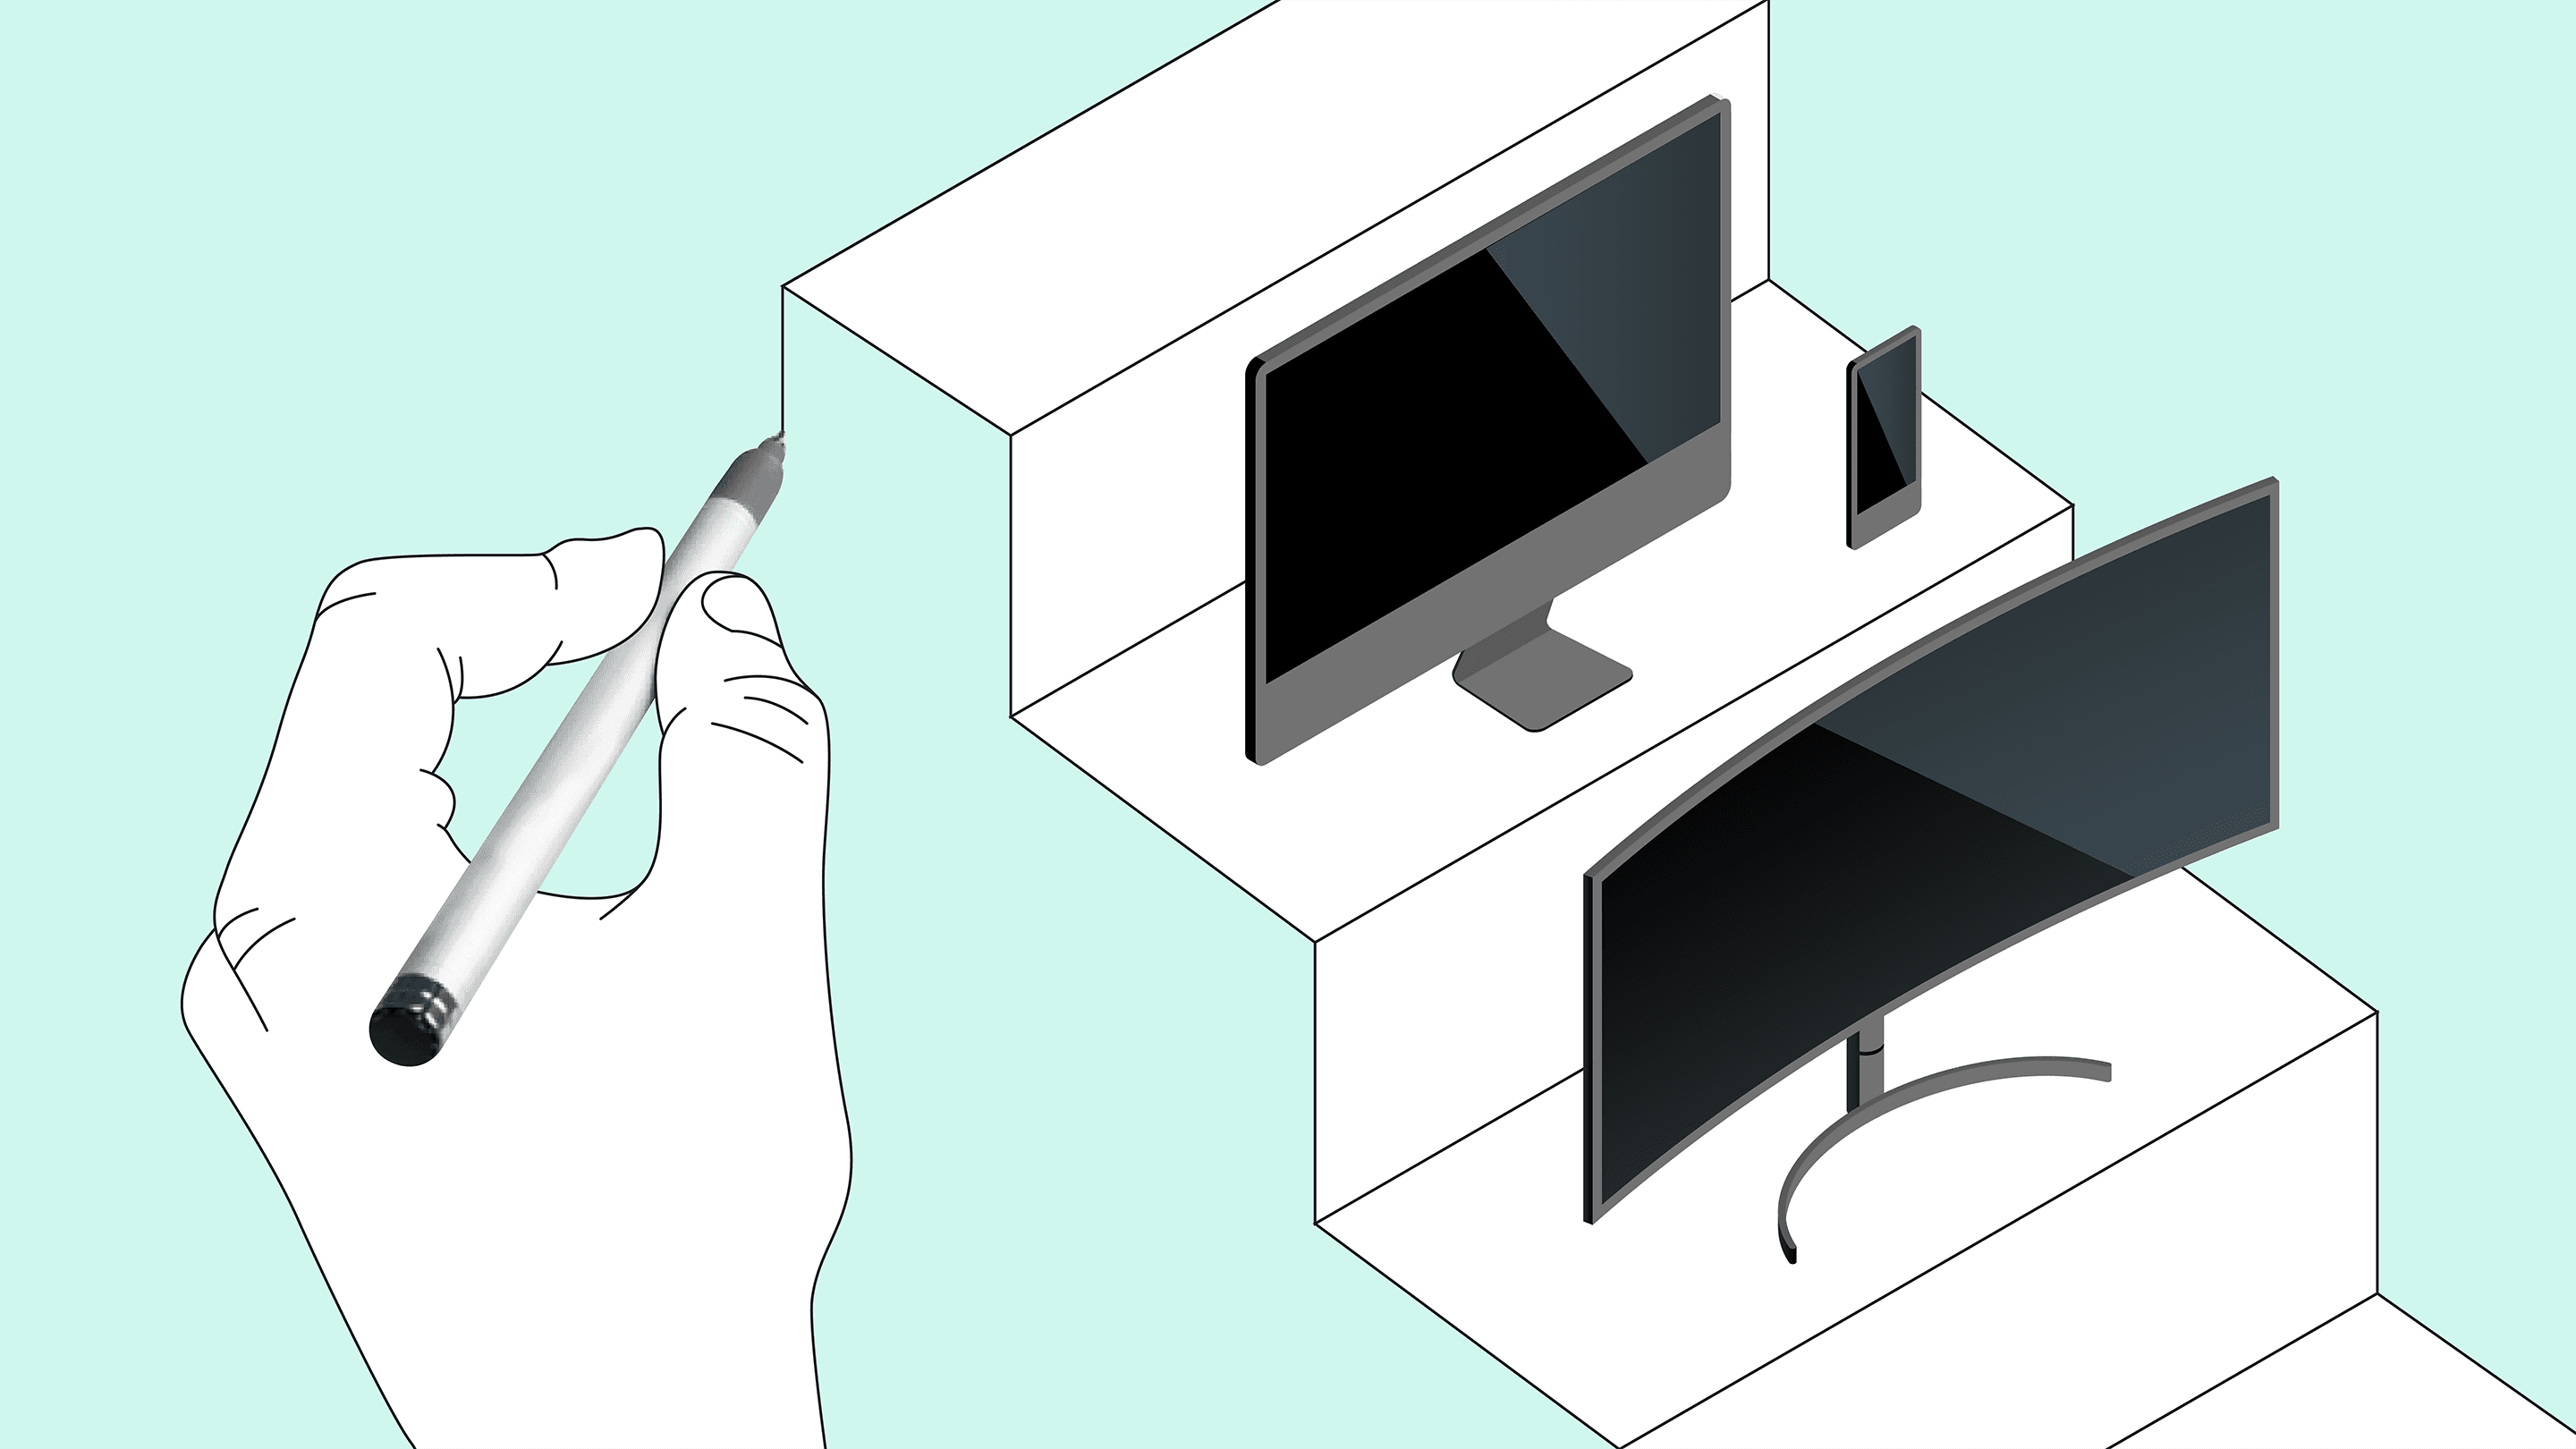 A hand completes a drawing of a staircase while two computer monitors and a cellphone sit on the finished staircase steps.